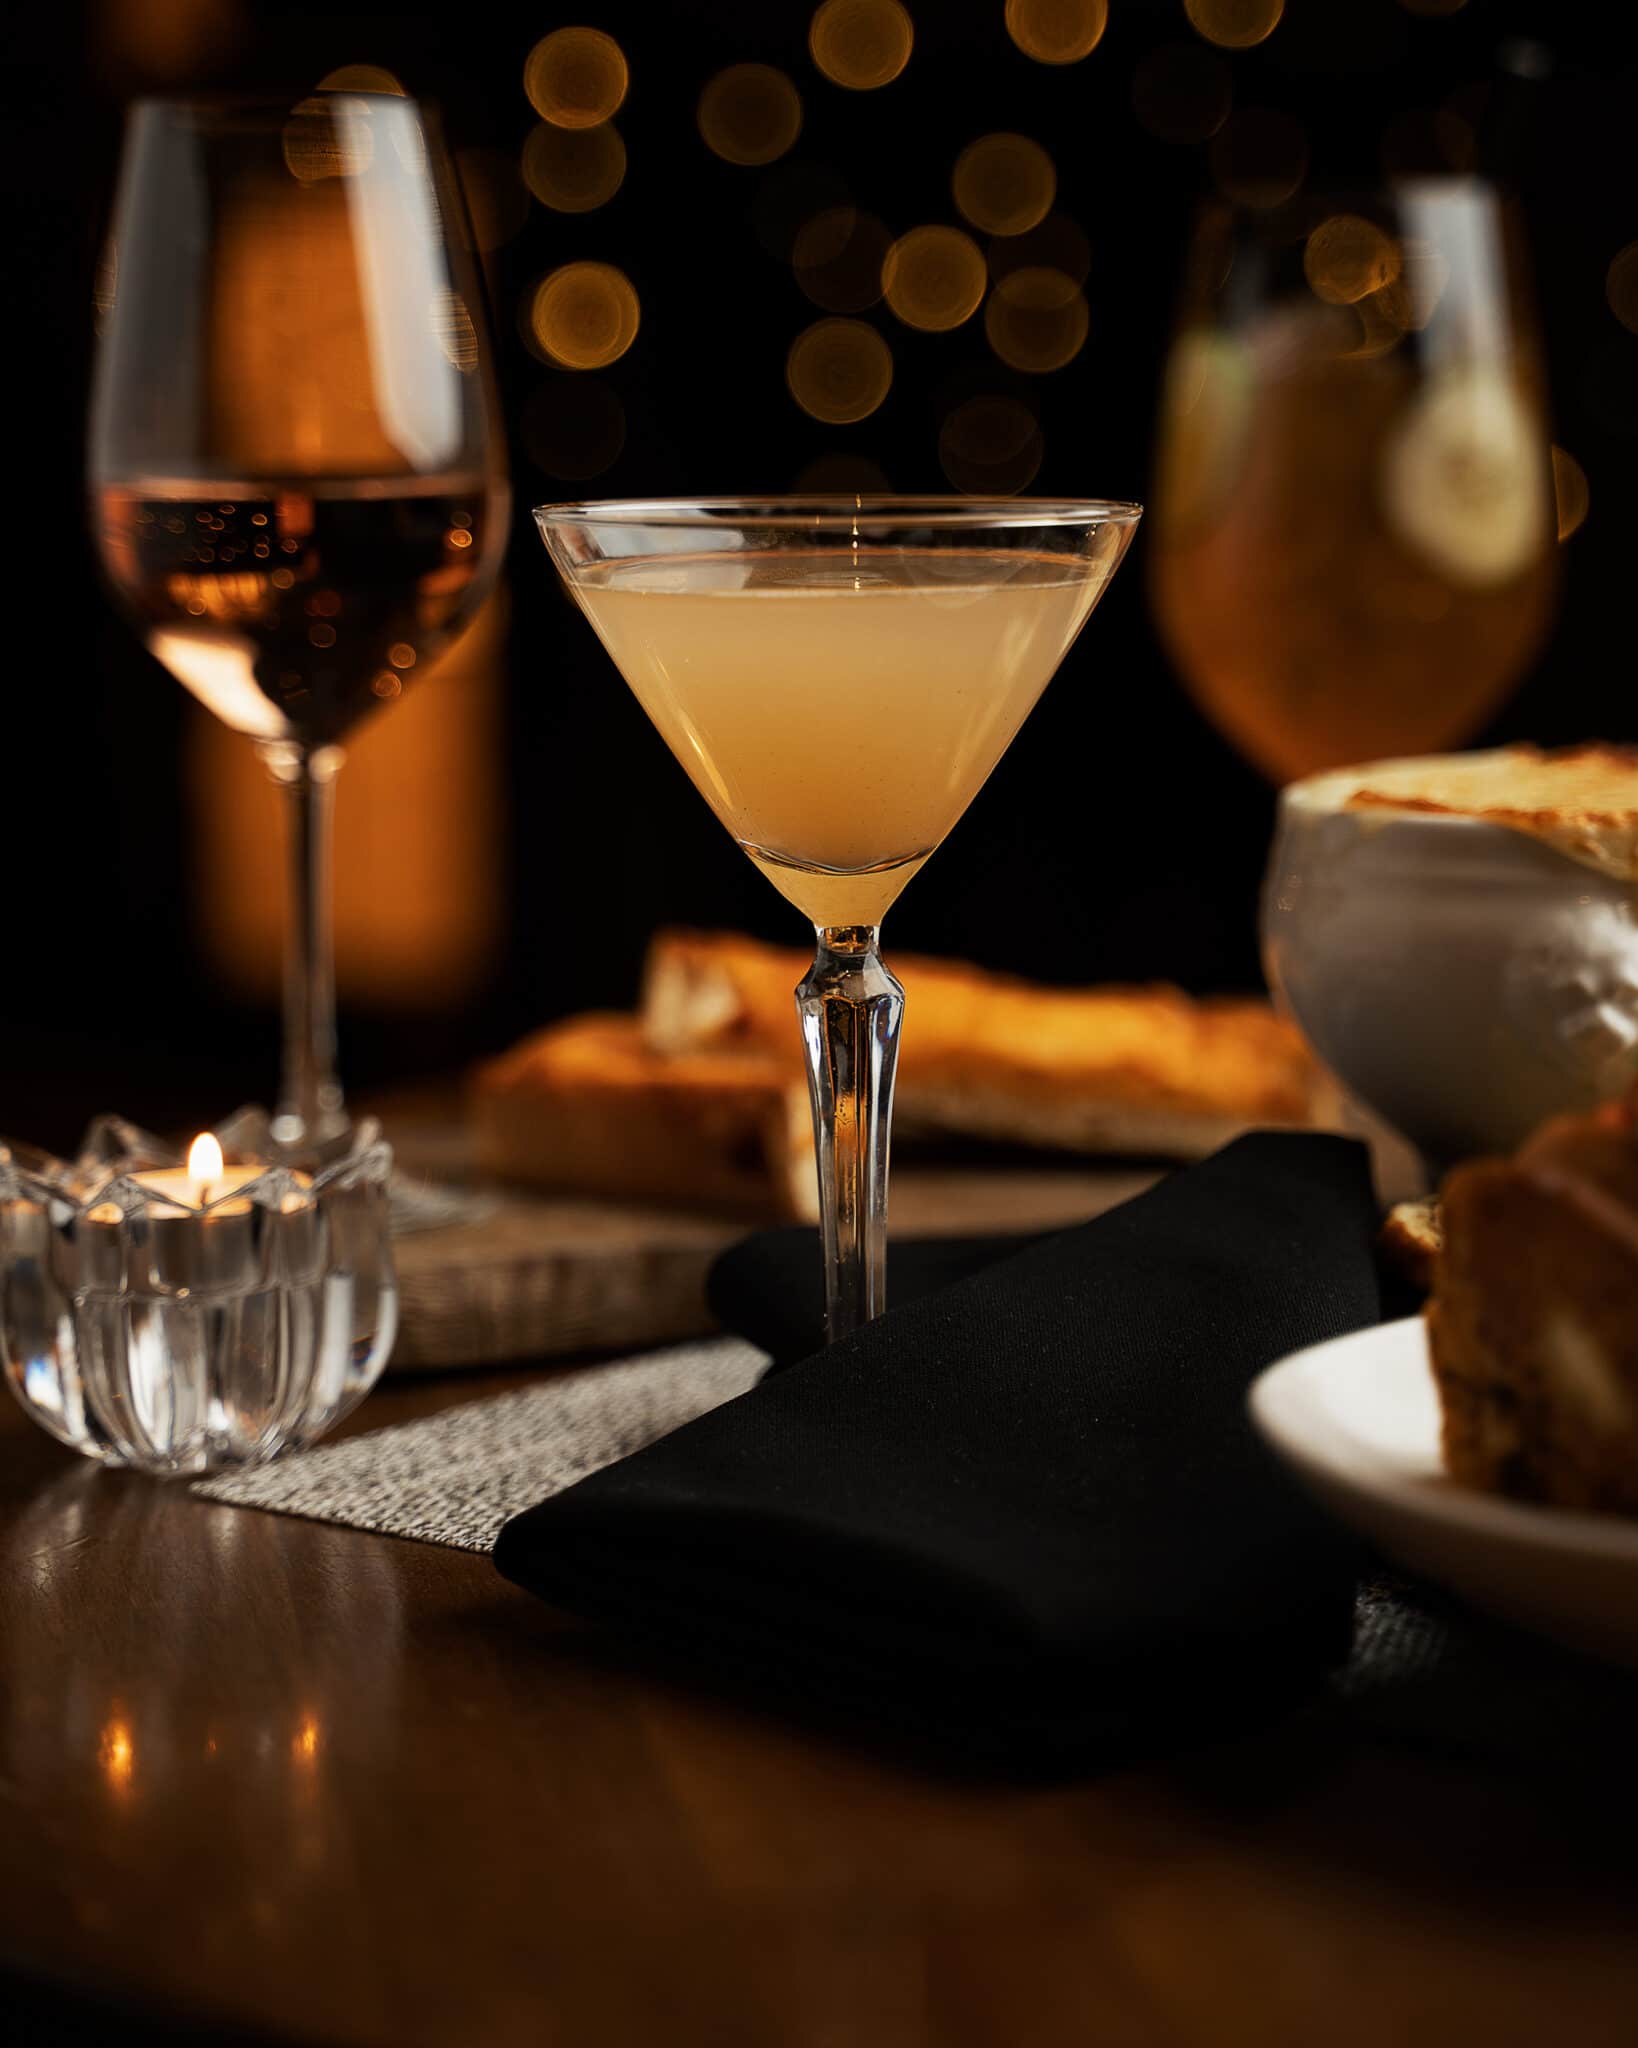 A dark and moody photo of a martini, with a glass of wine and a french onion soup in the background